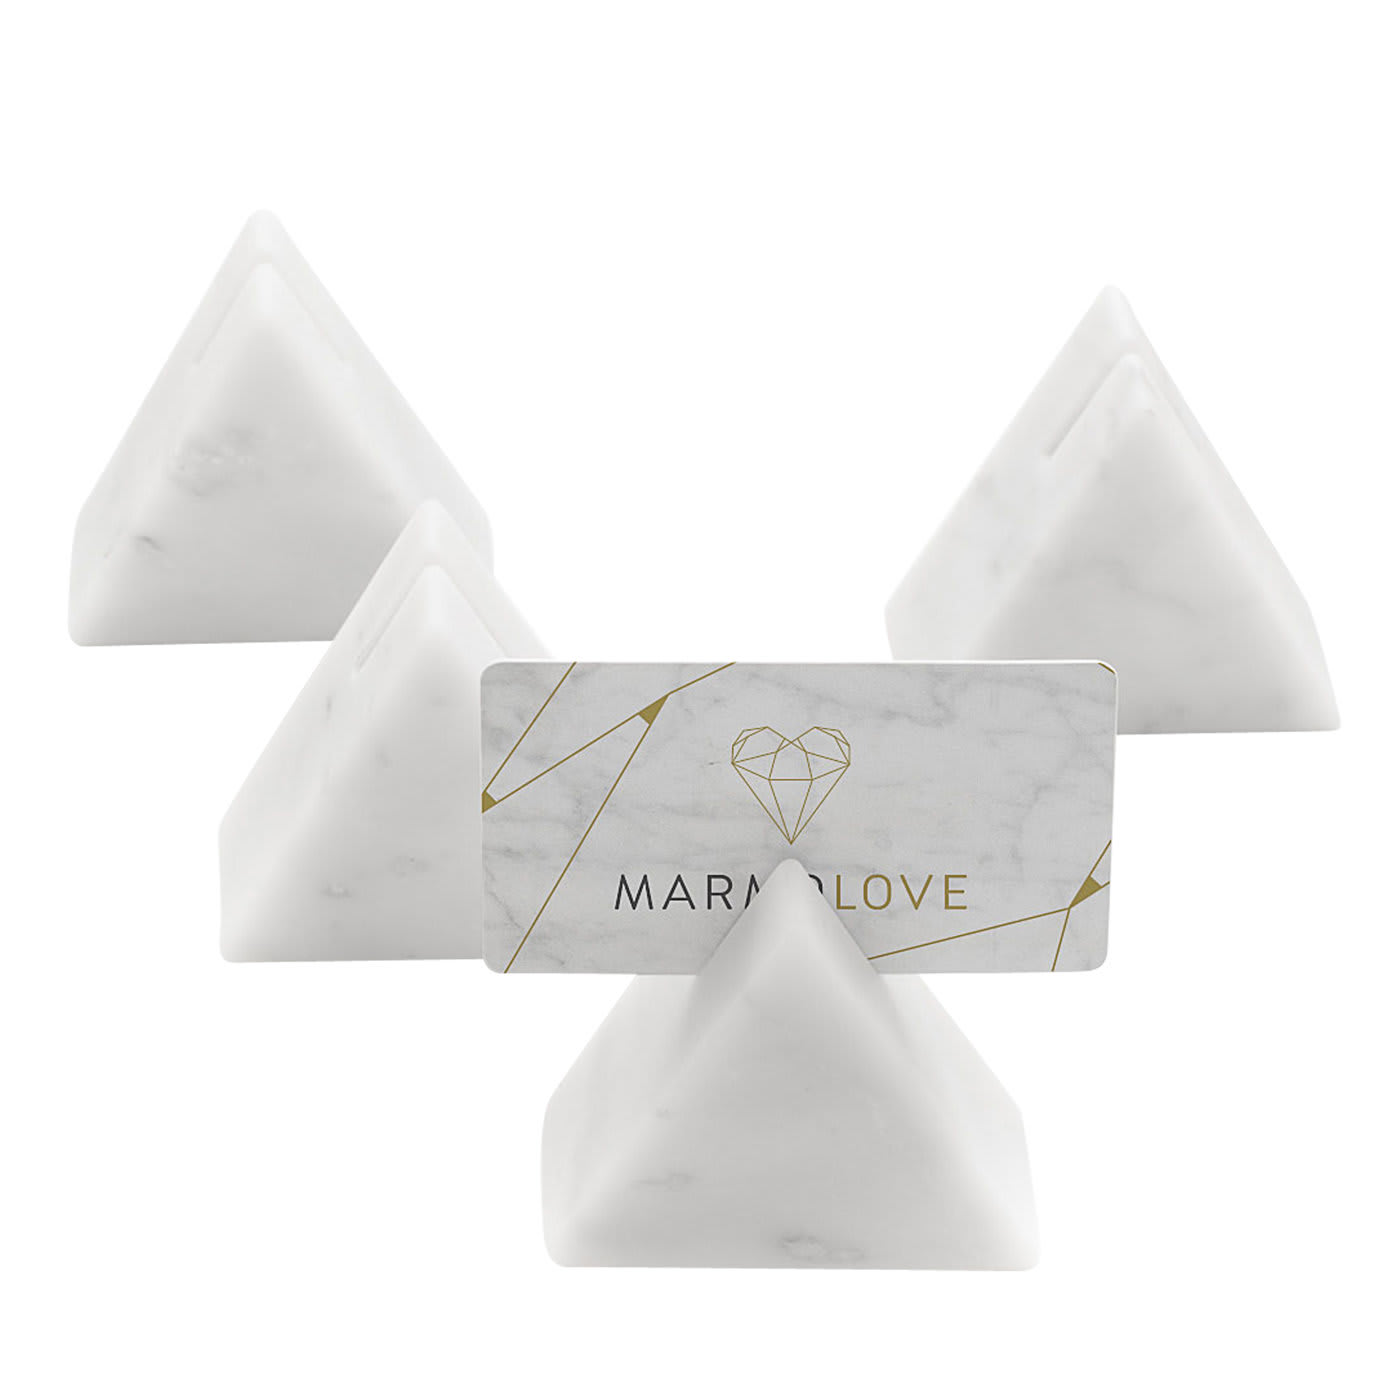 Set of 6 Marble Placeholders - Marmolove